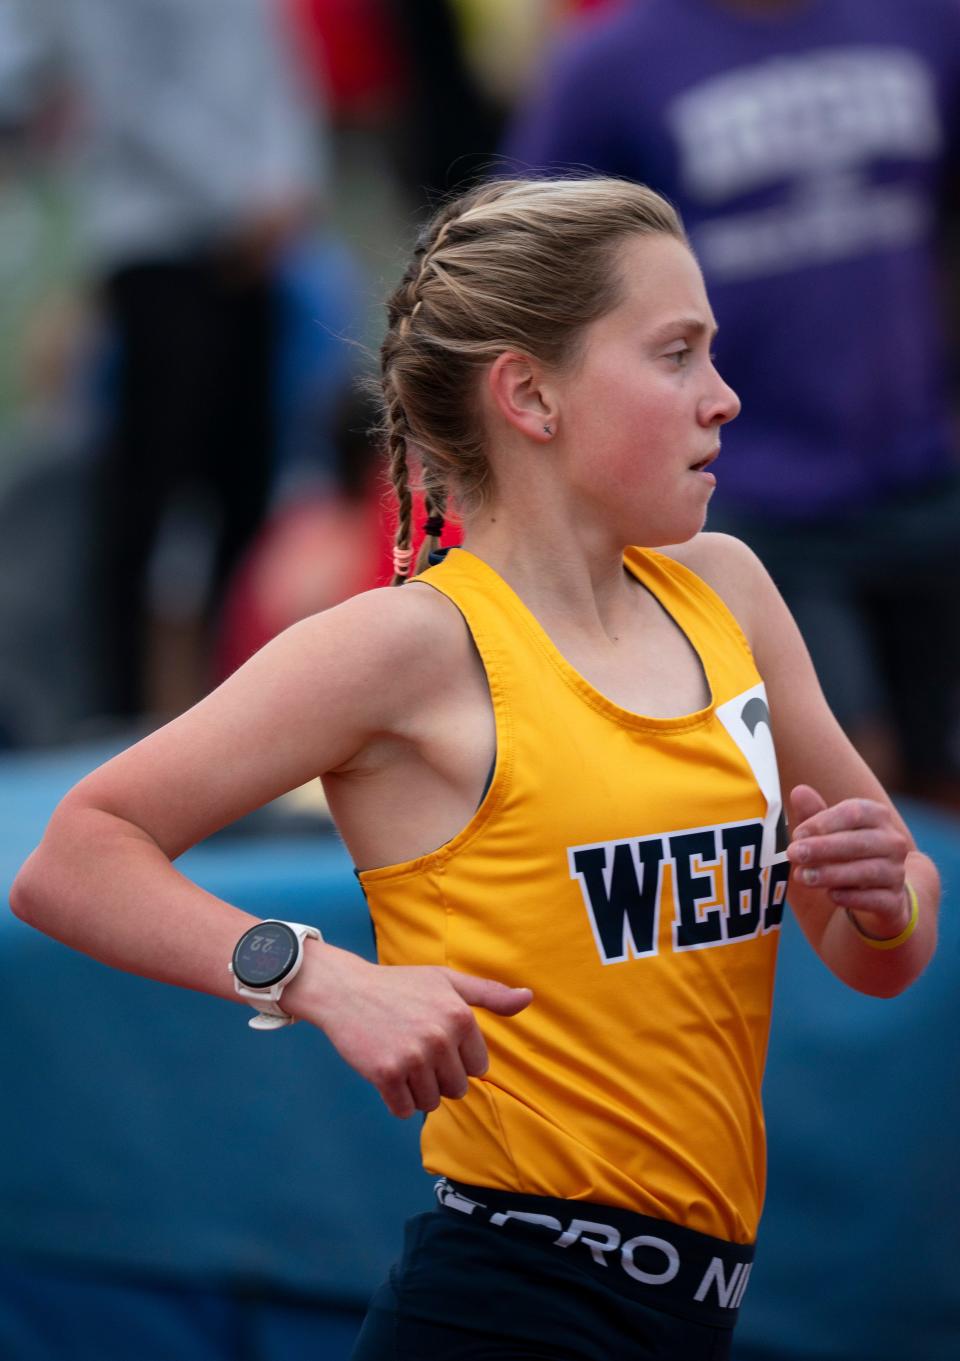 The Webb SchoolÕs Abby Faith Cheeseman competes in the 1600 meter run during the Great Eight Invitational 2024 at Franklin Road Academy in Nashville, Tenn., Thursday evening, April 25, 2024. Cheeseman finished in second place with a time of 4:42.24.